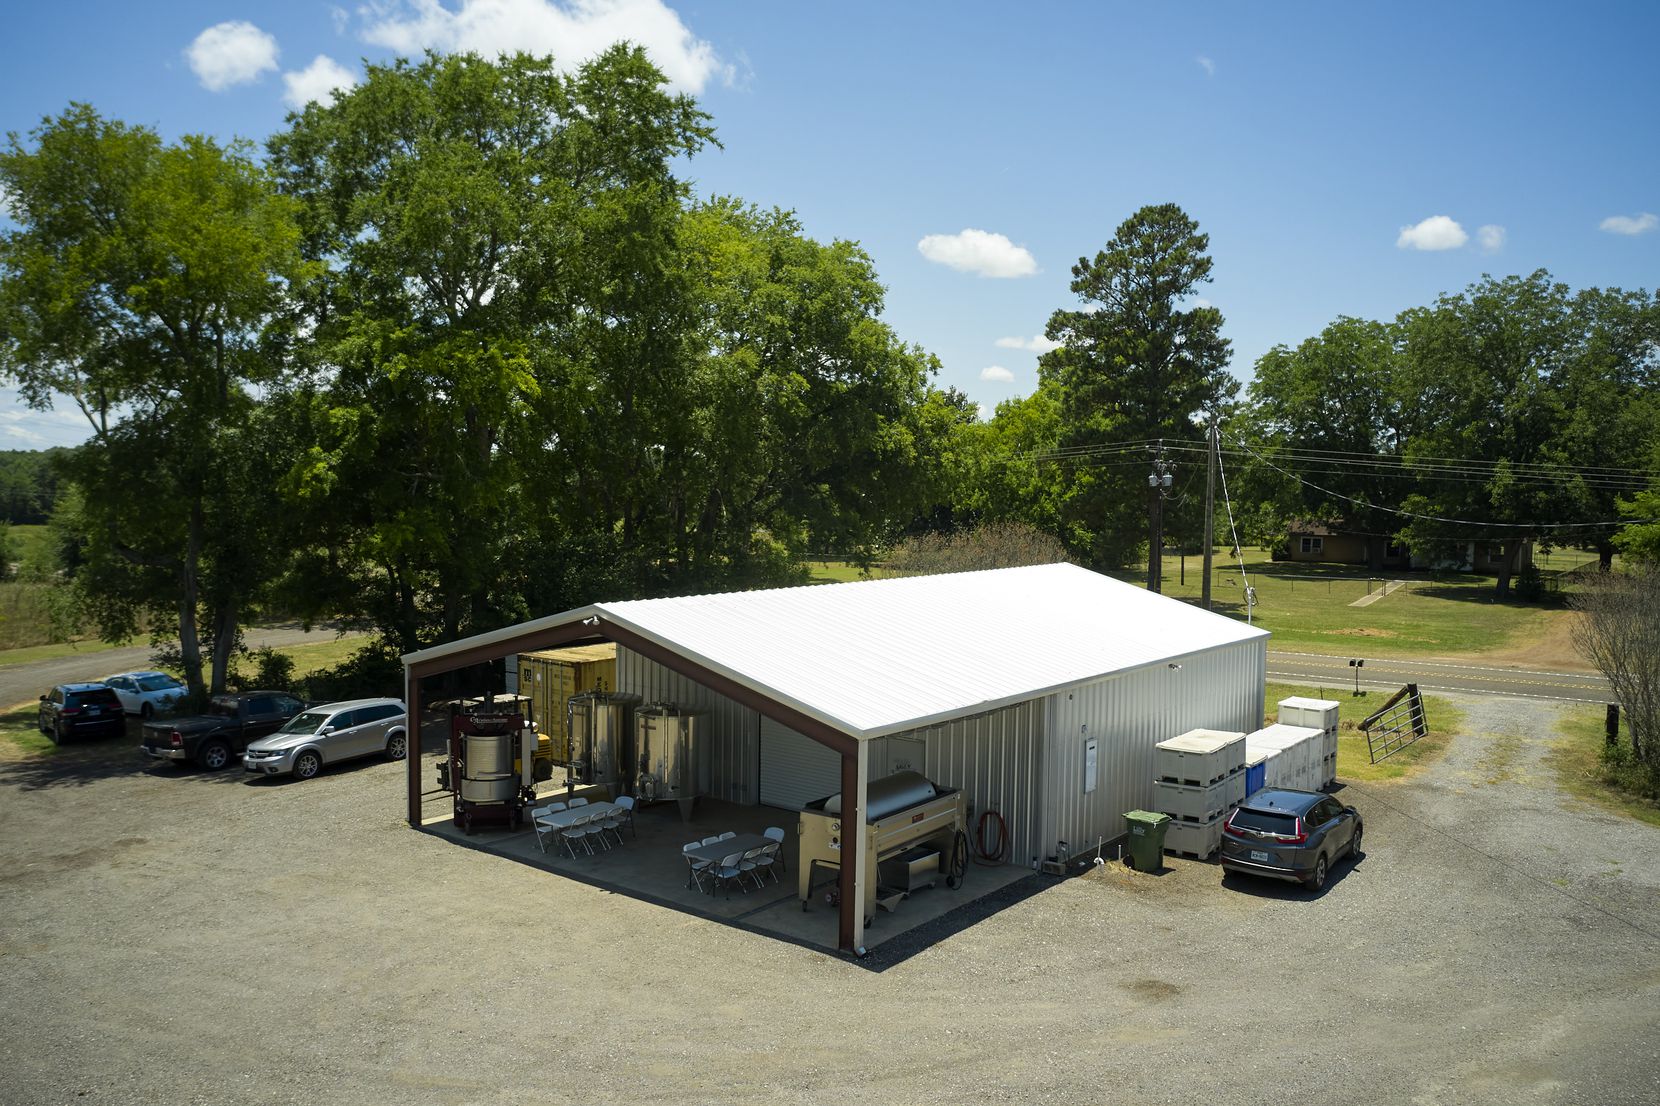 Sage's Vintage custom crush facility is located in East Texas.